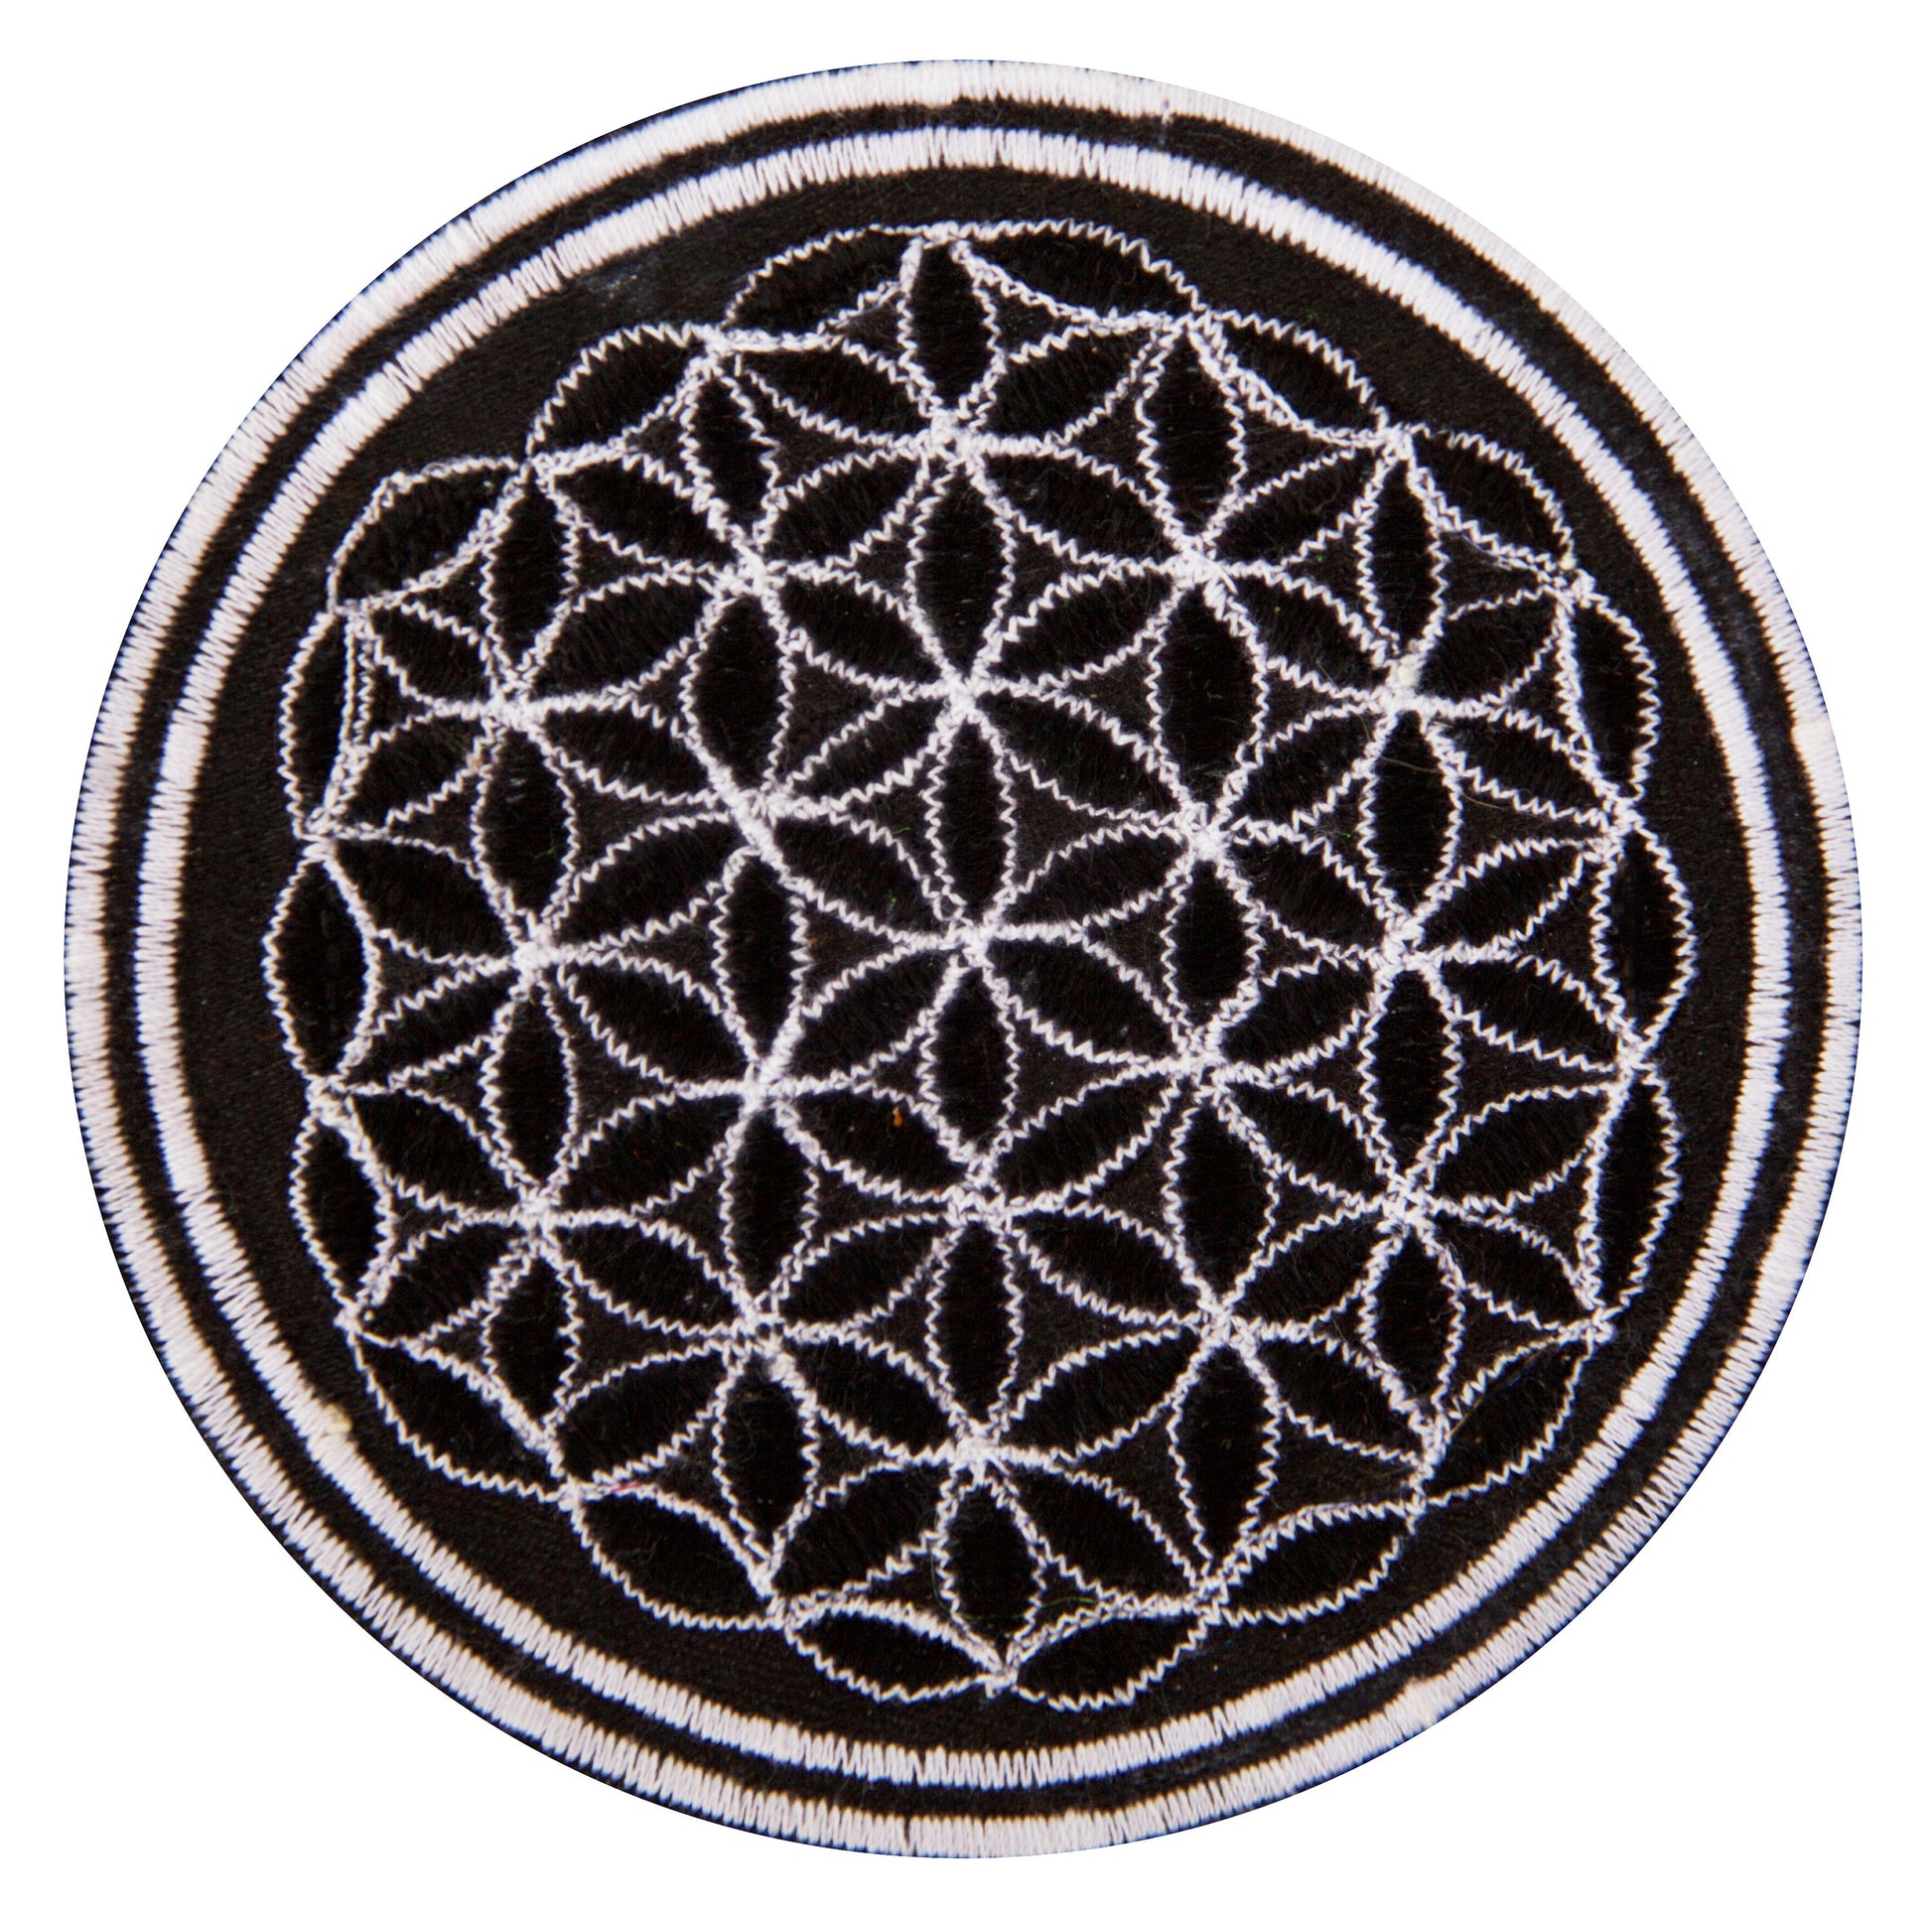 white black flower of life patch small size with variations